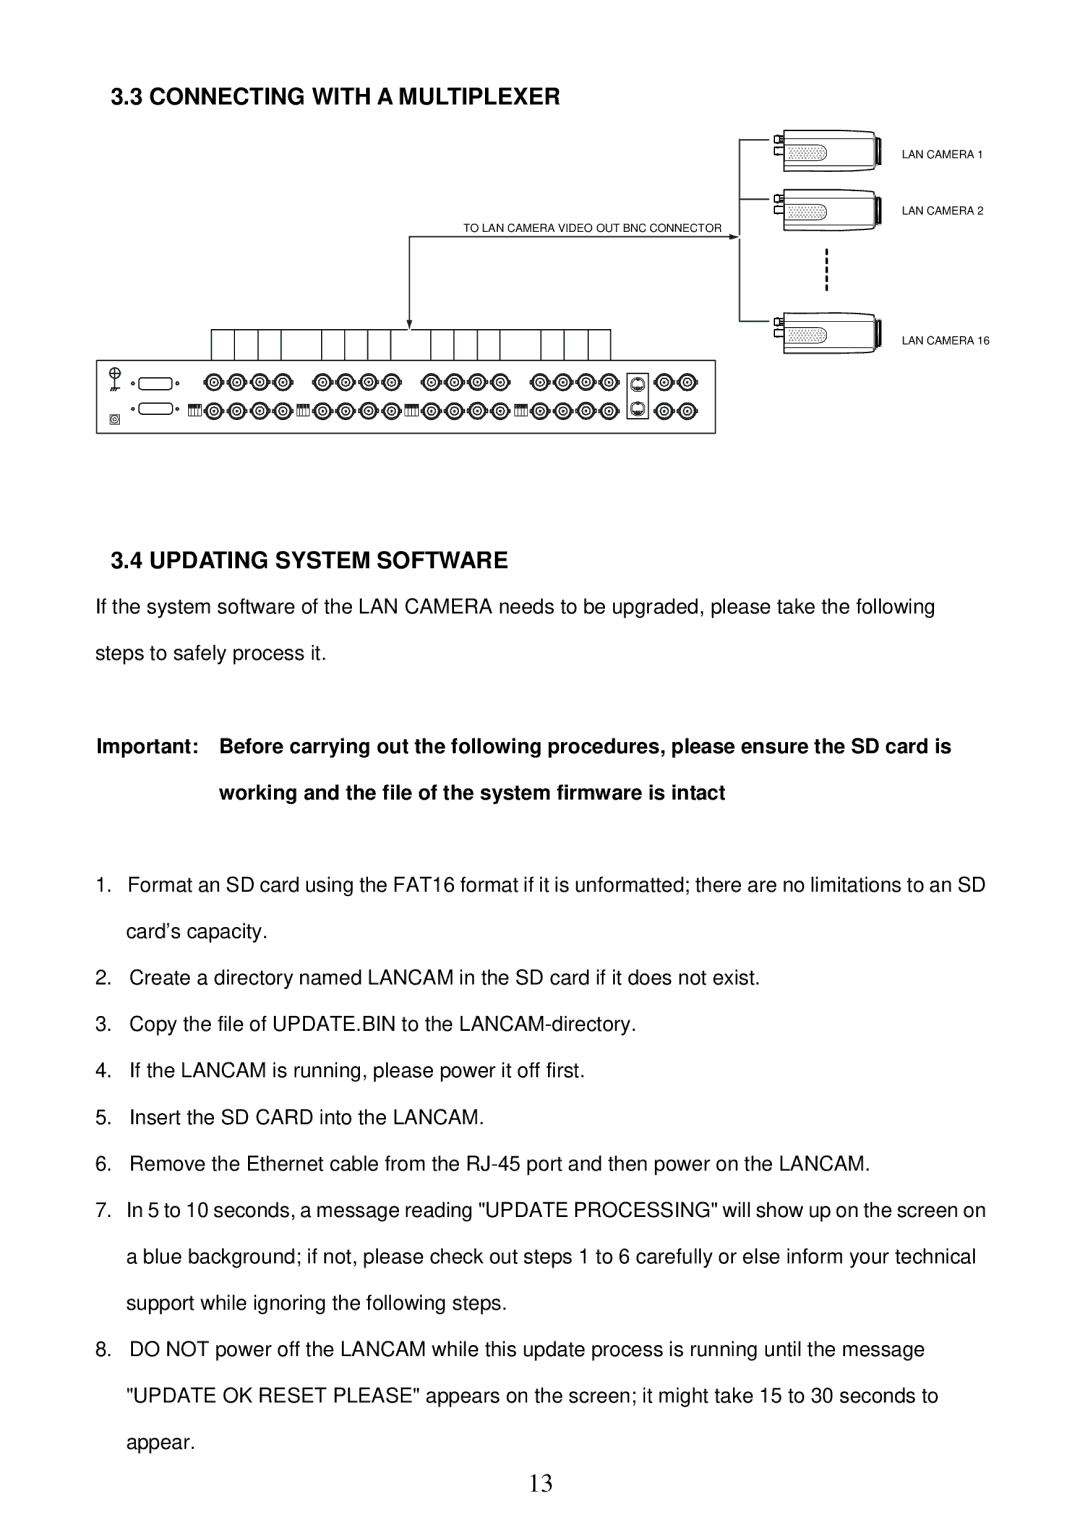 Sony MPEG4 LAN Camera operation manual Connecting with a Multiplexer 